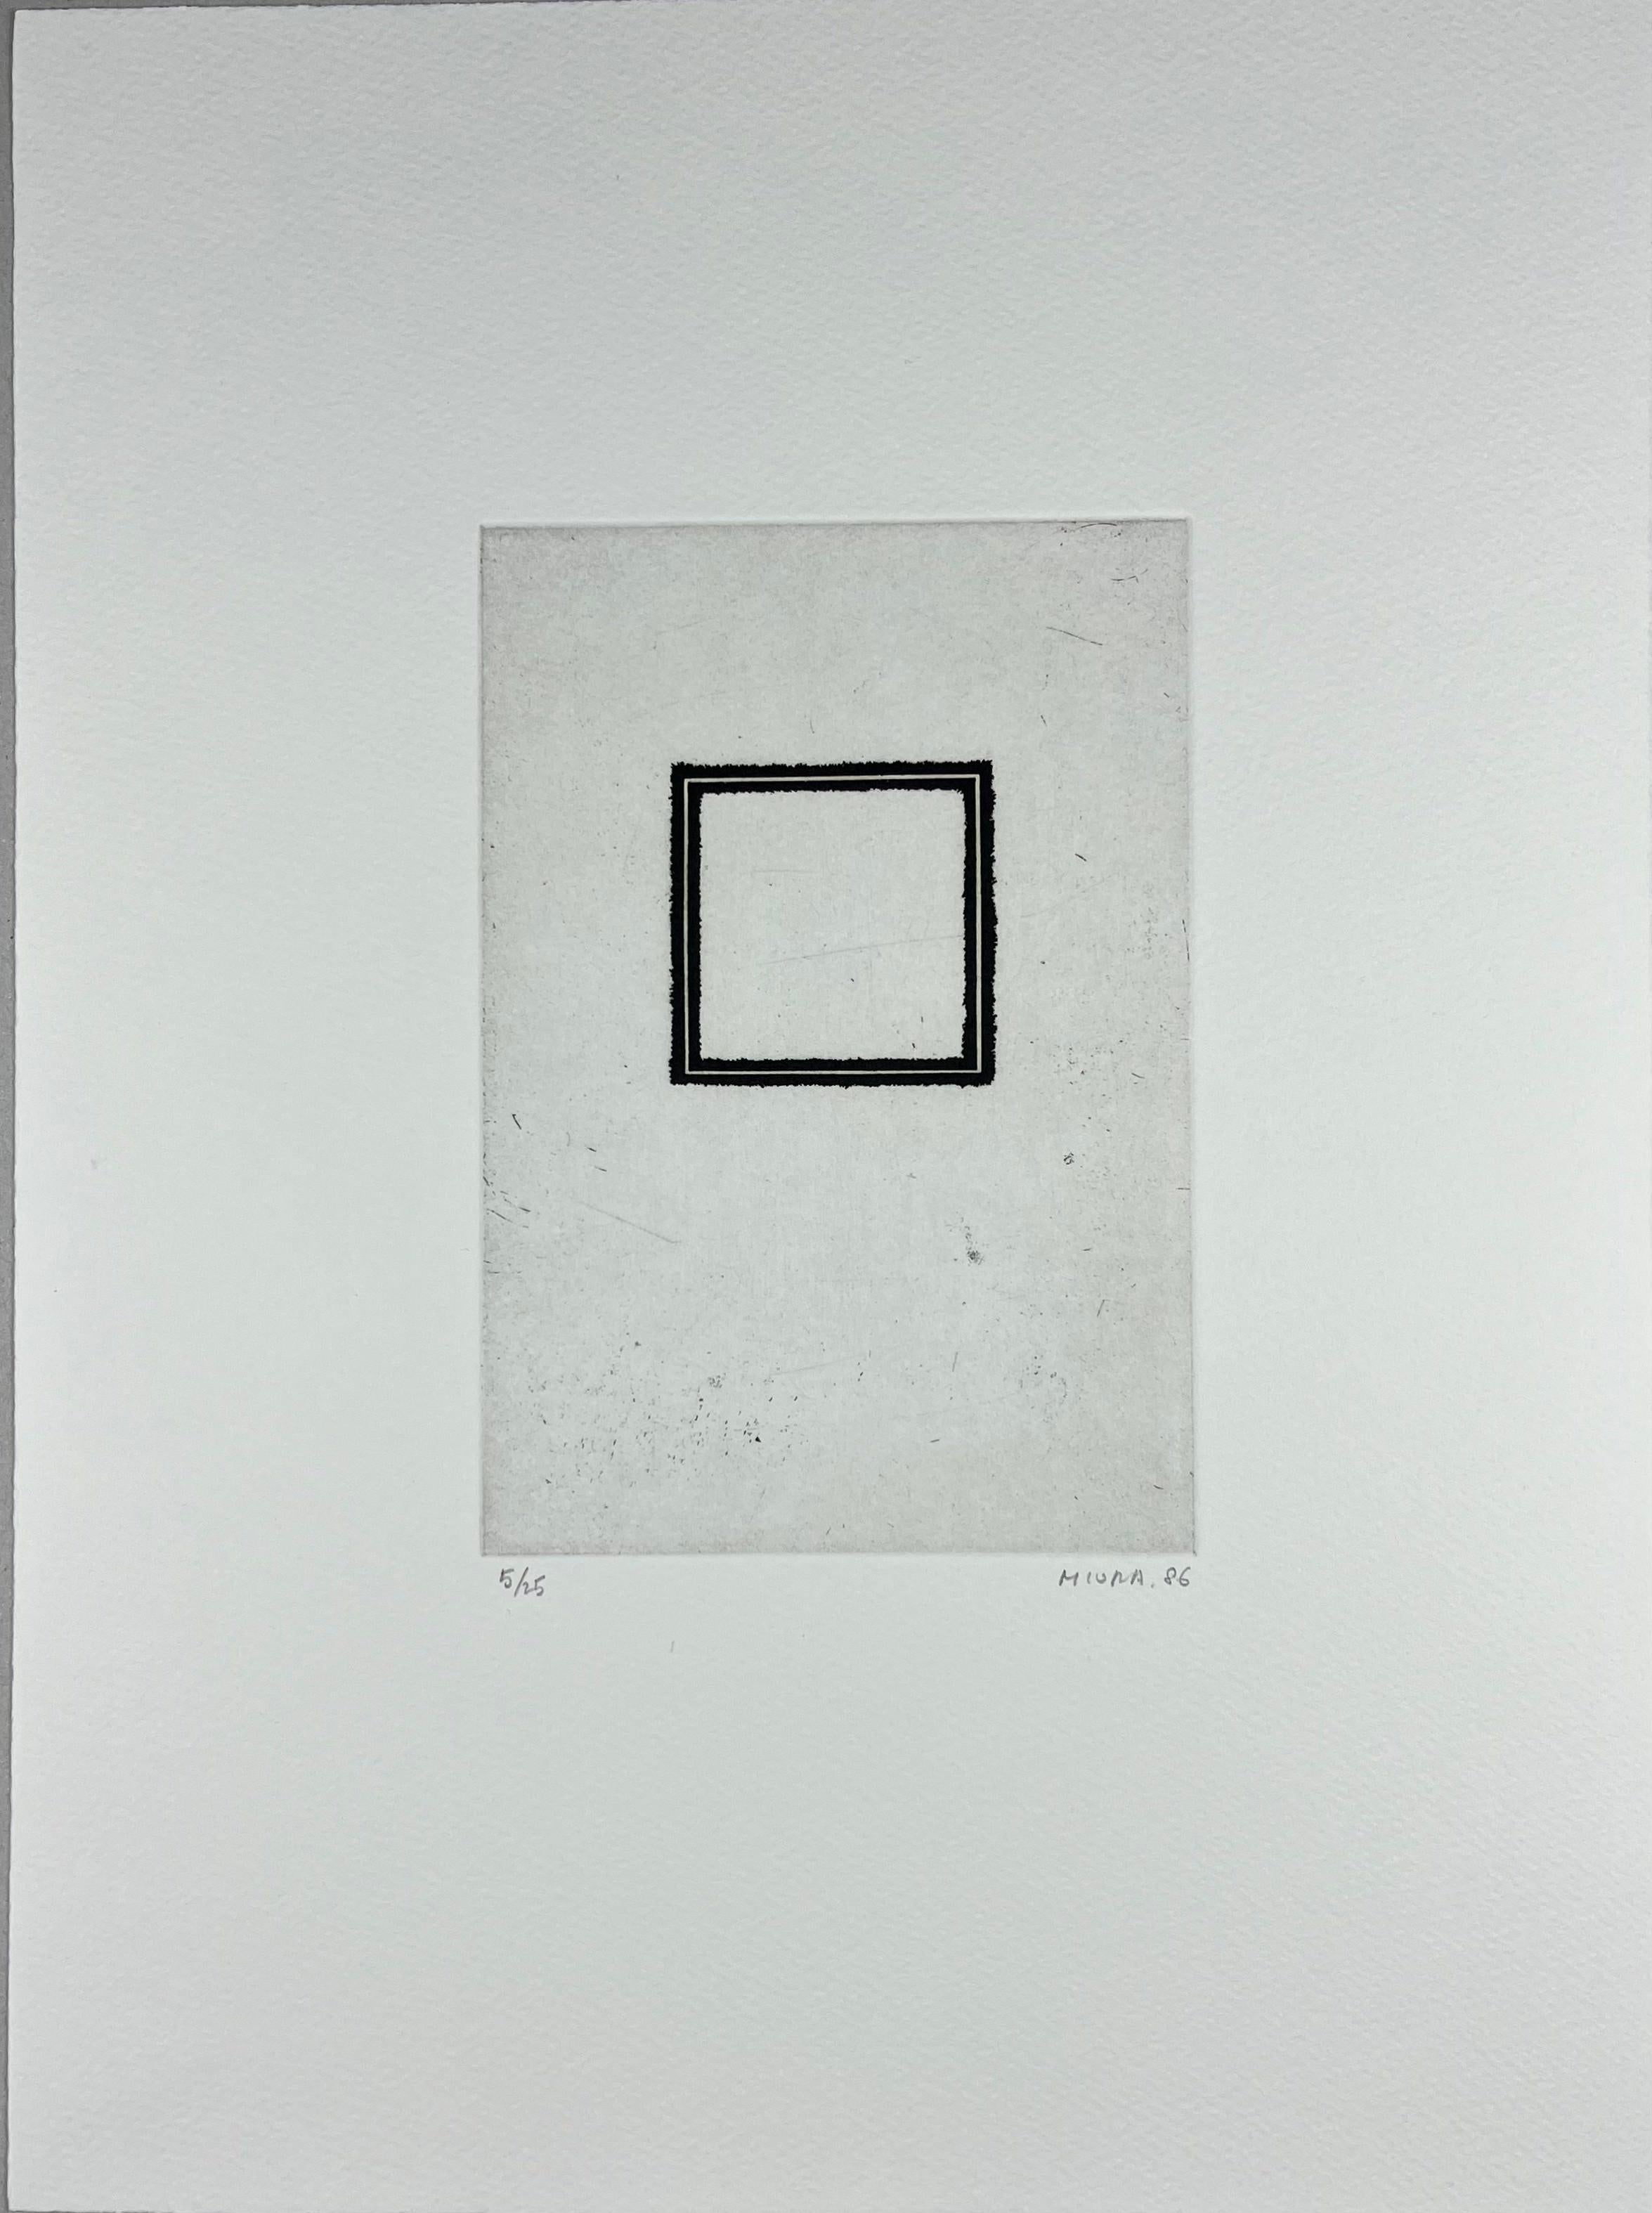 Mitsuo Miura Abstract Print - Japanese 1986 signed limited edition original art print etching  15x11 in.